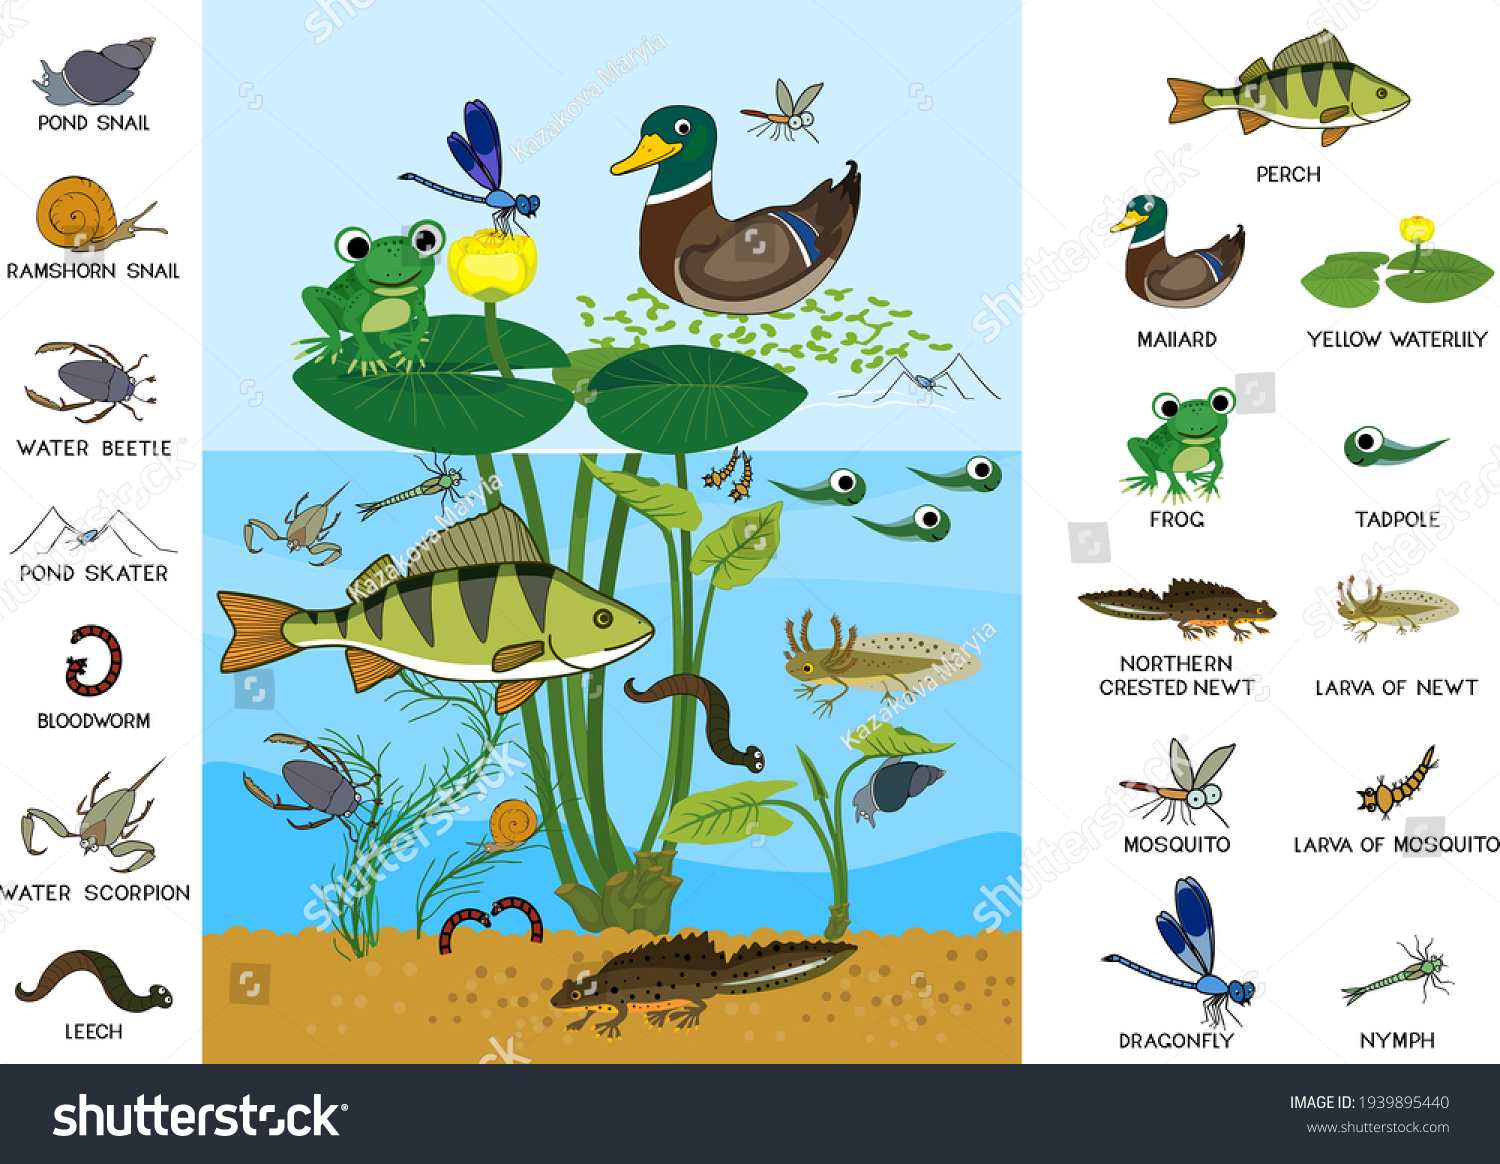 8,825 Freshwater ecosystems Images, Stock Photos & Vectors | Shutterstock